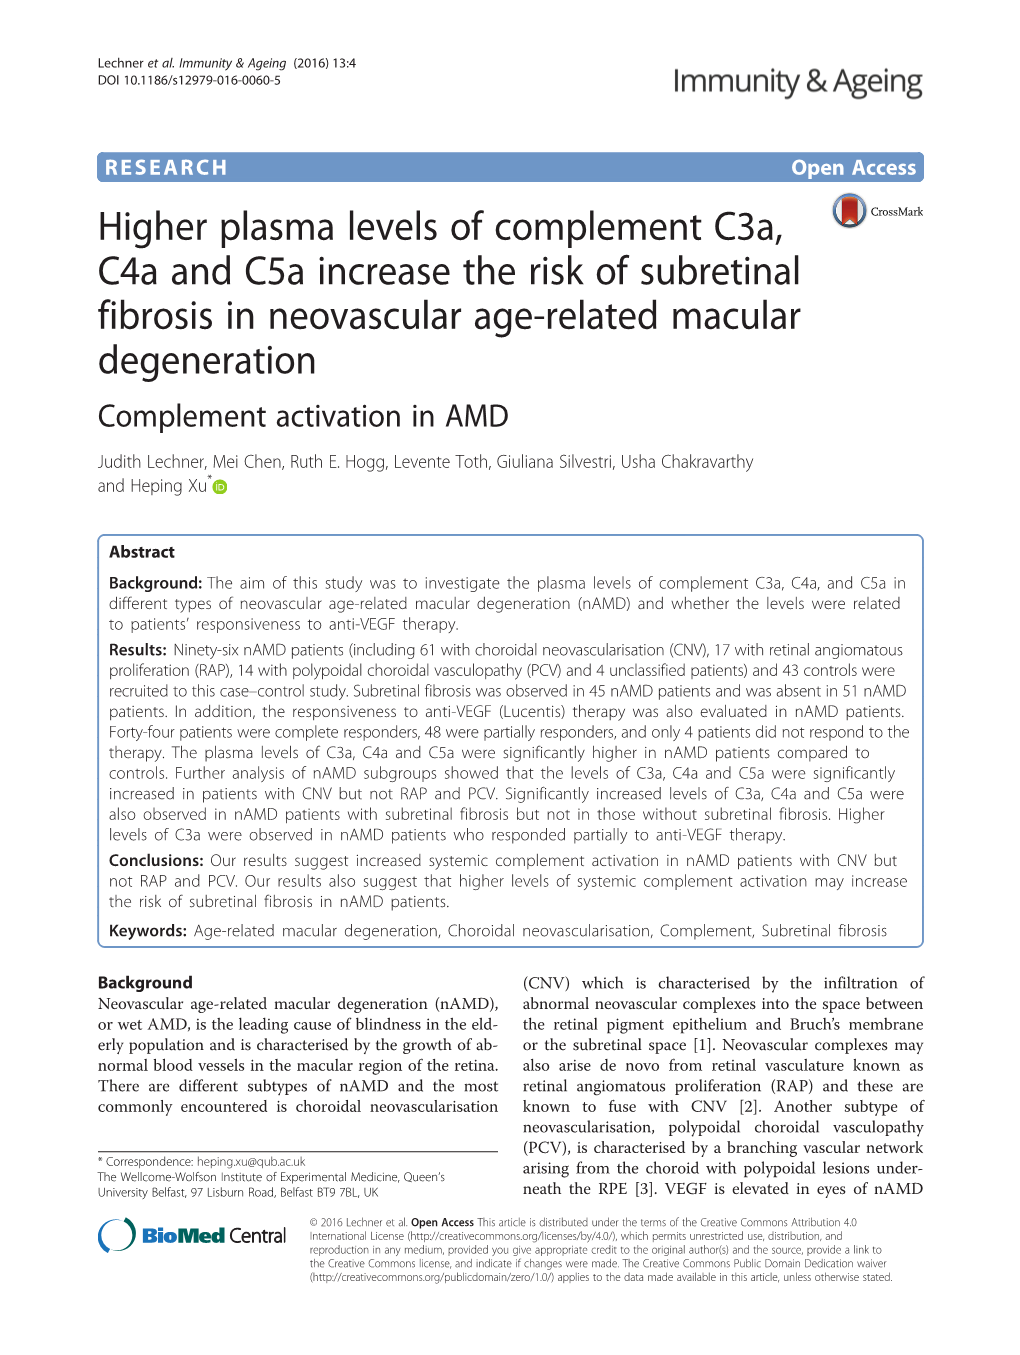 Higher Plasma Levels of Complement C3a, C4a and C5a Increase the Risk